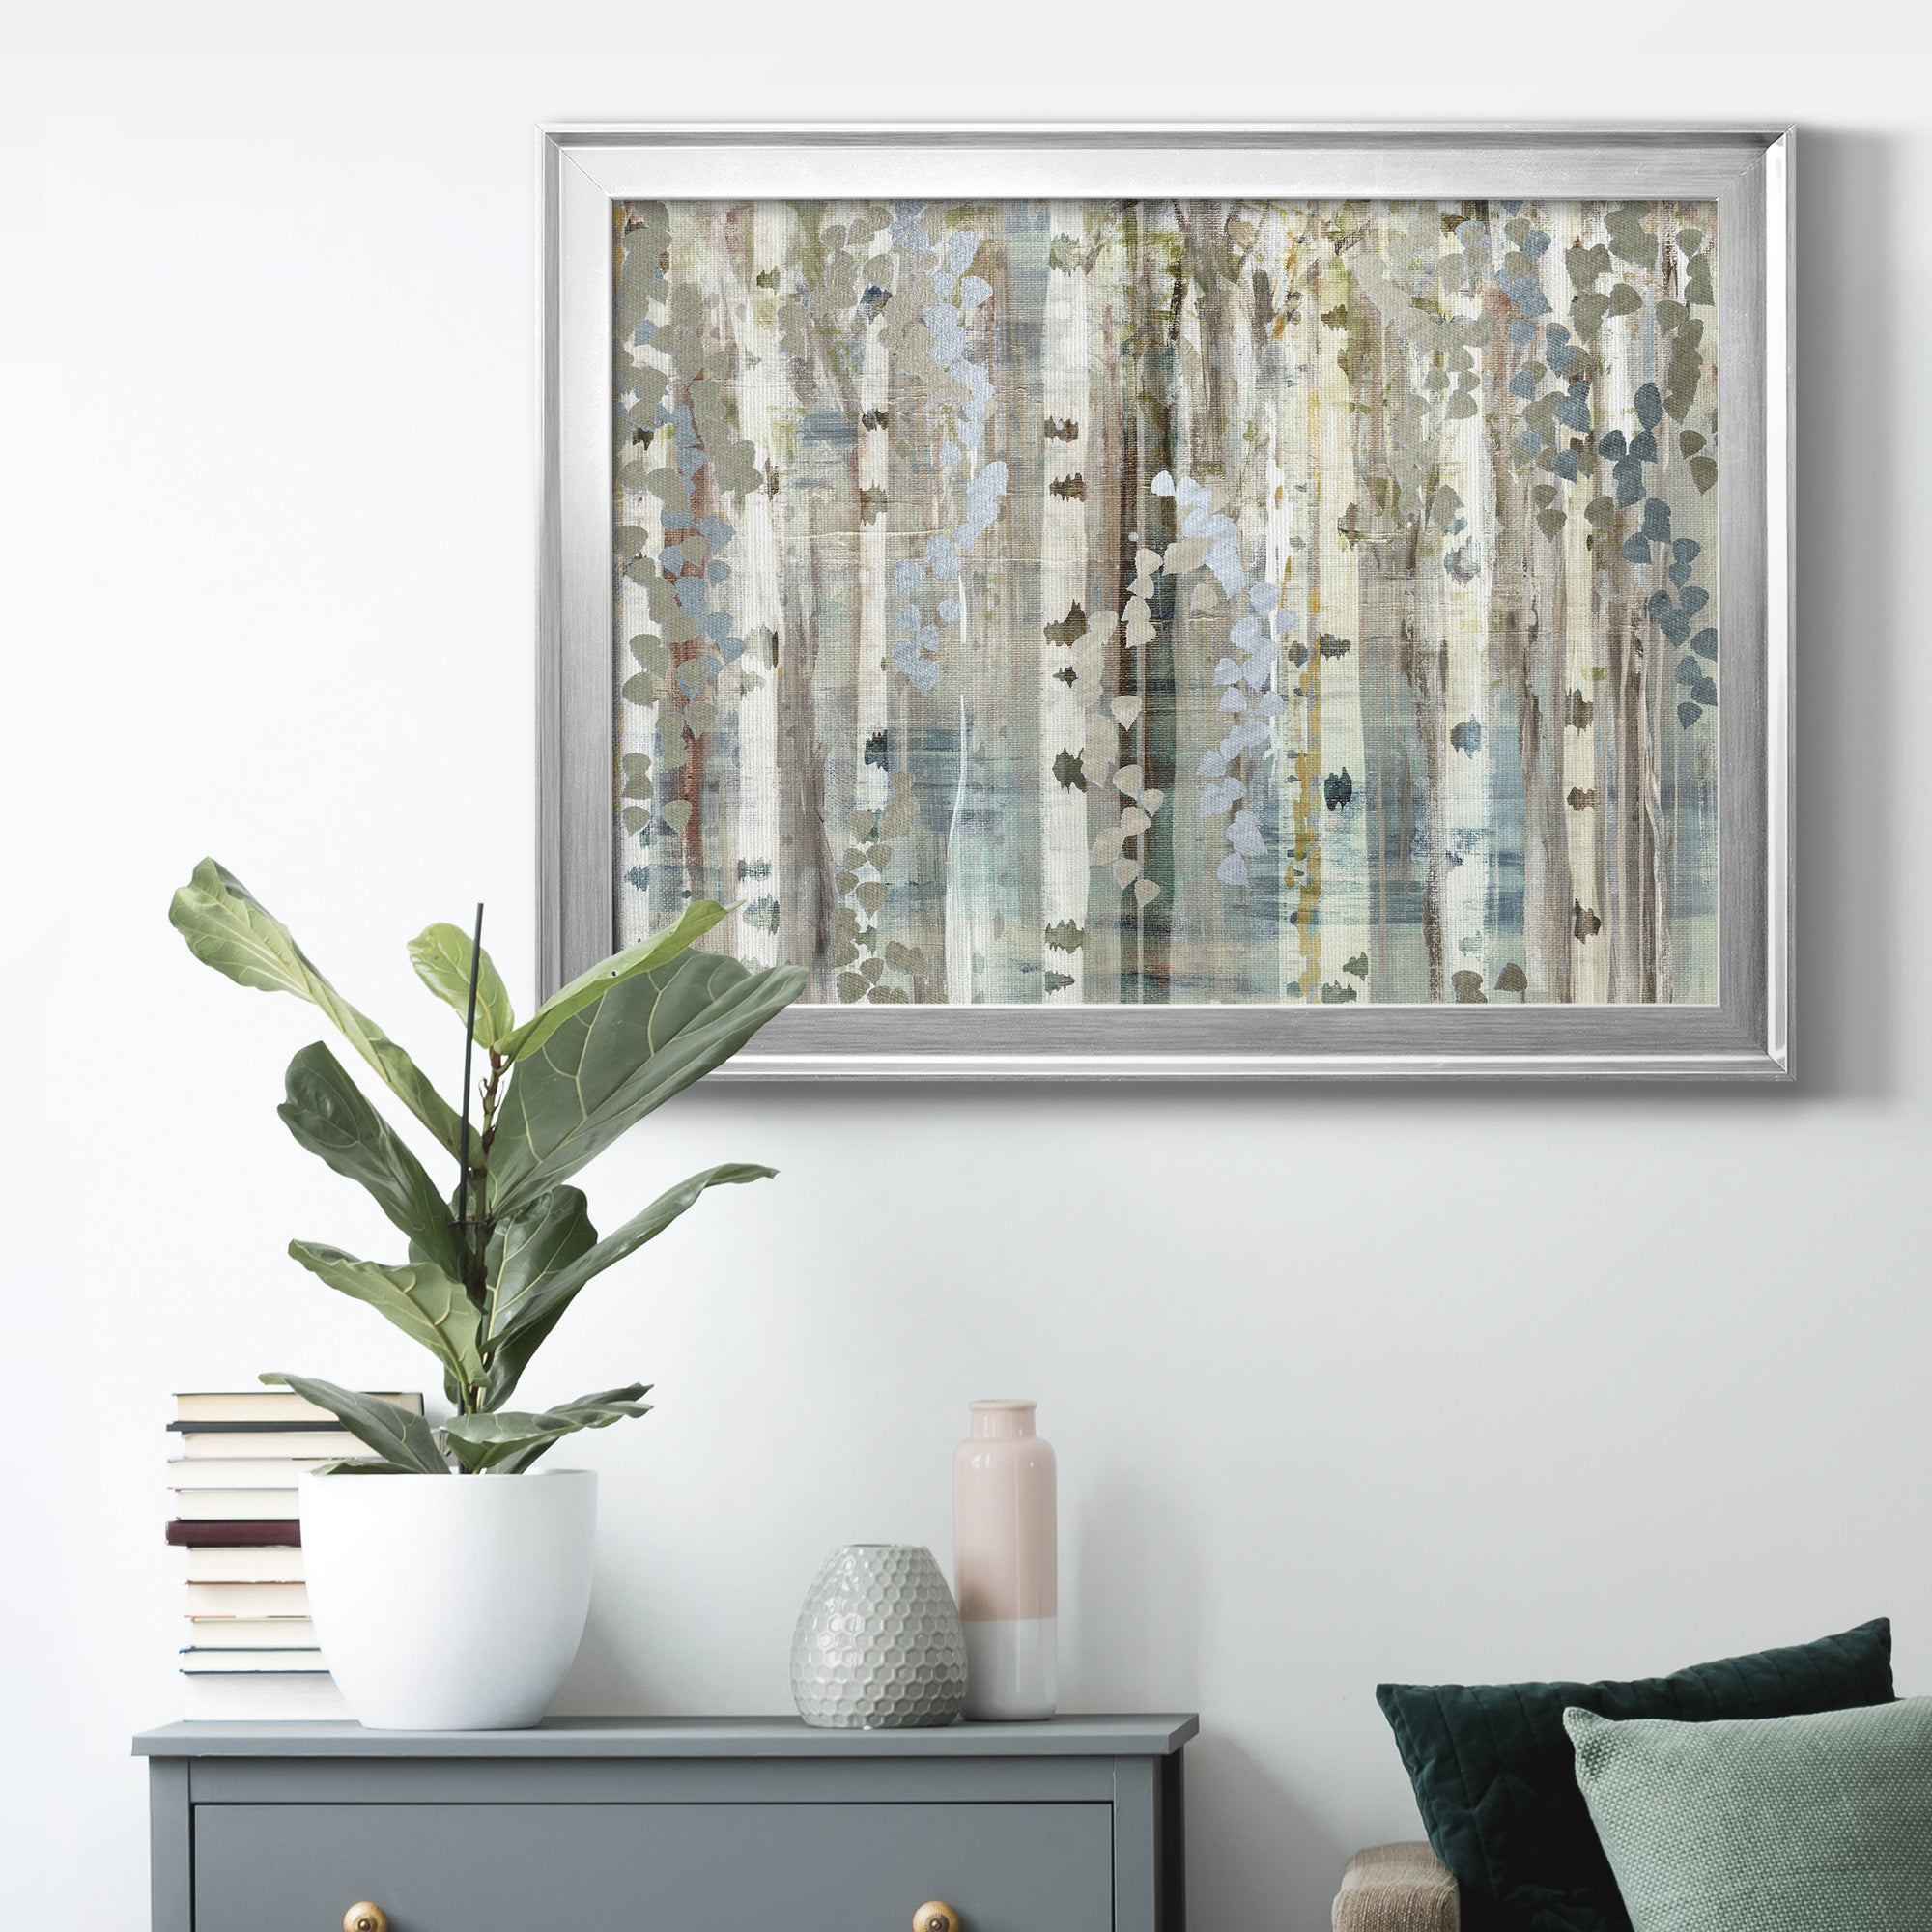 Birch Wood Meadow Premium Classic Framed Canvas - Ready to Hang